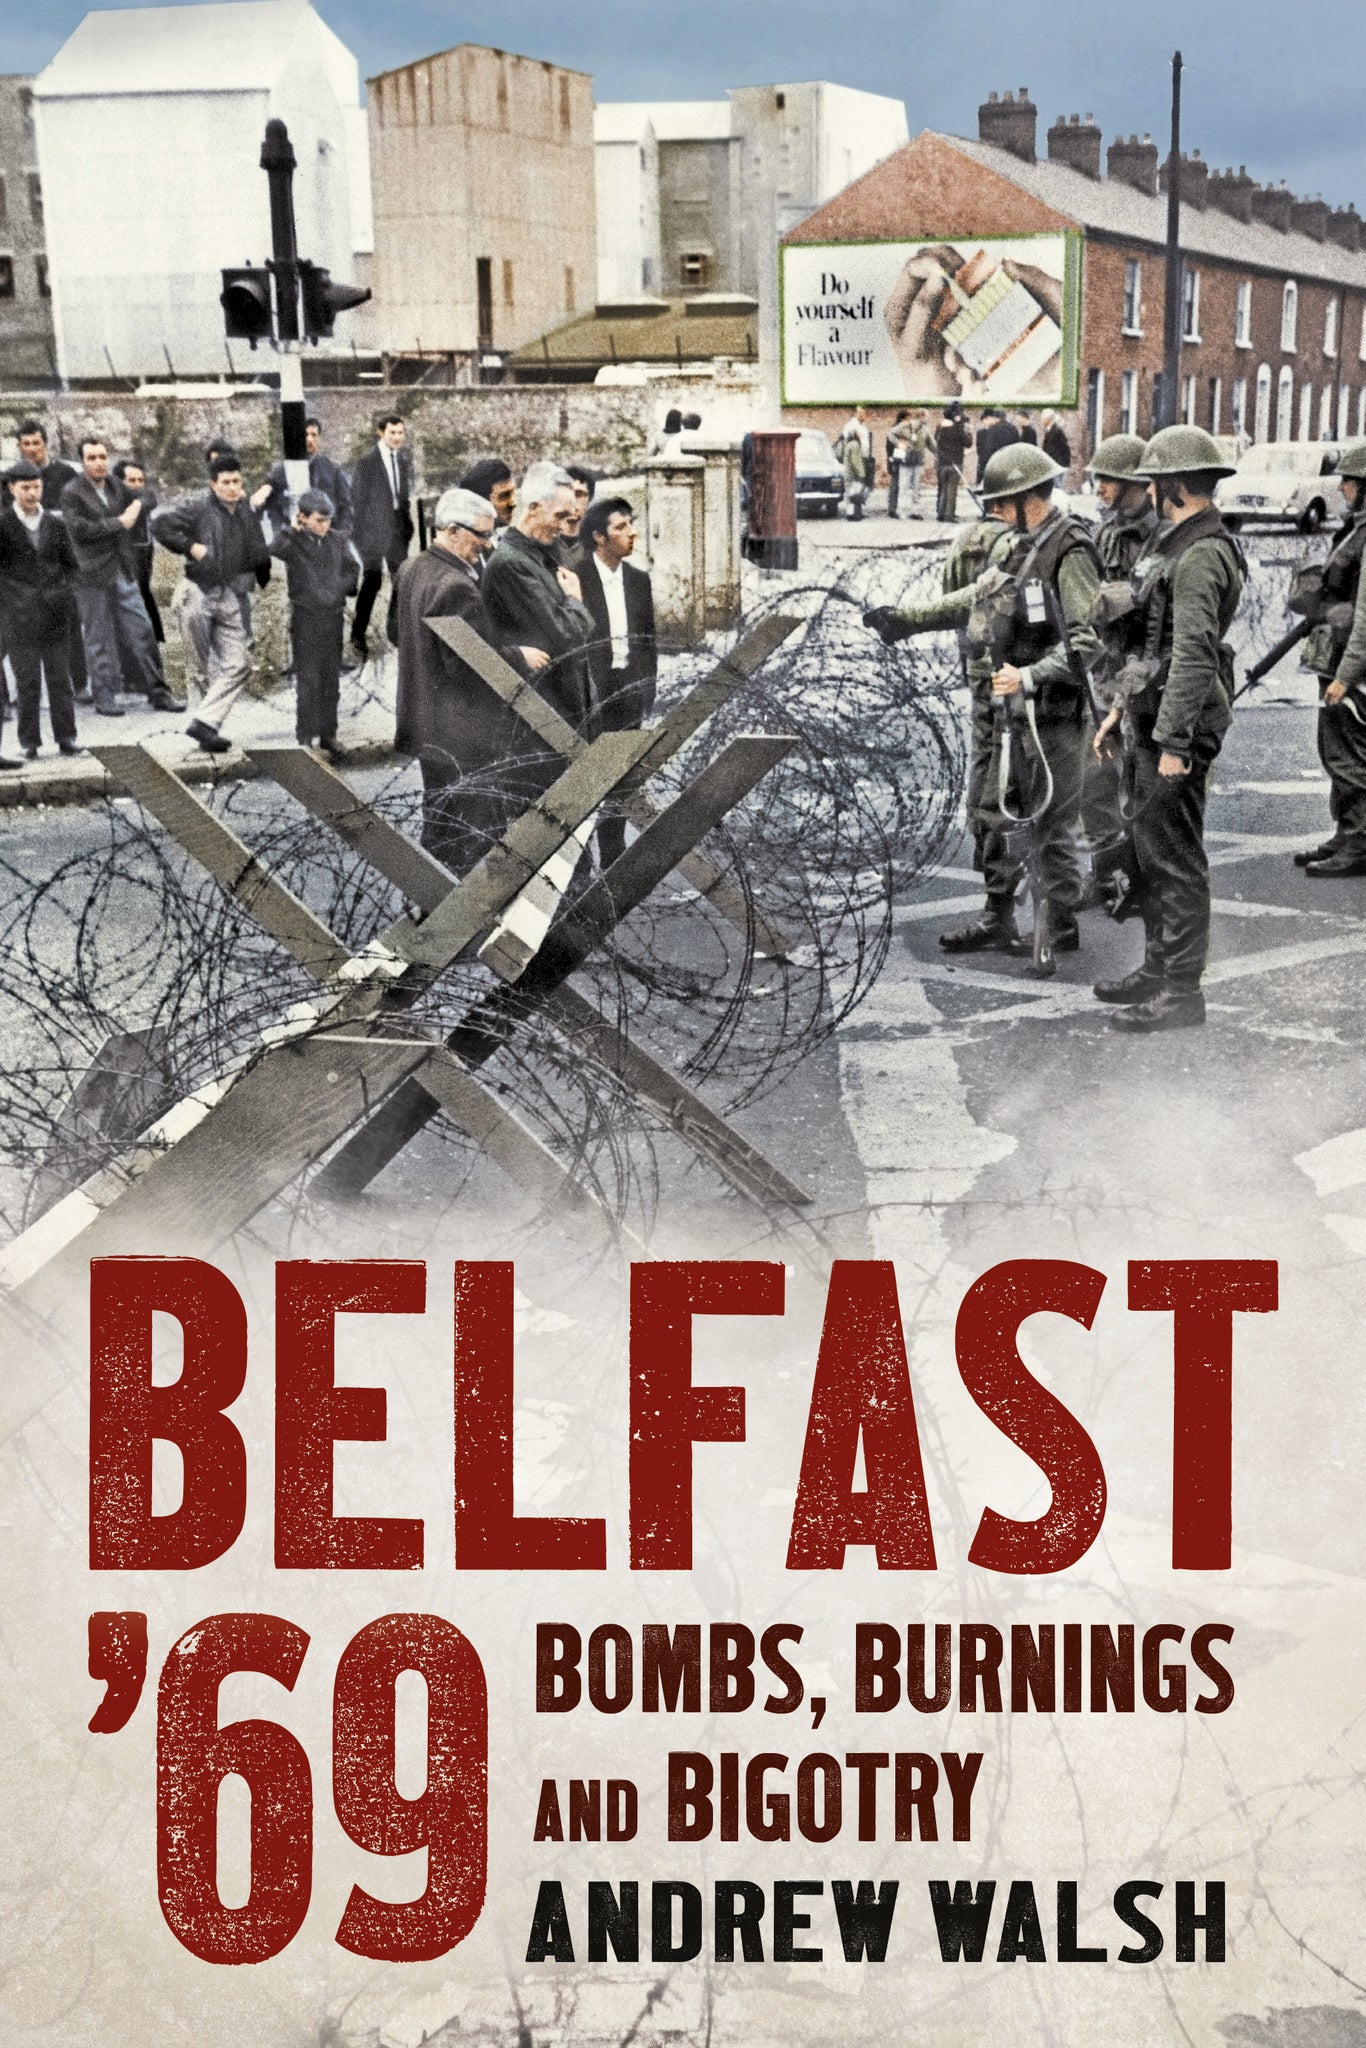 Belfast '69: Bombs, Burnings and Bigotry (paperback edition)